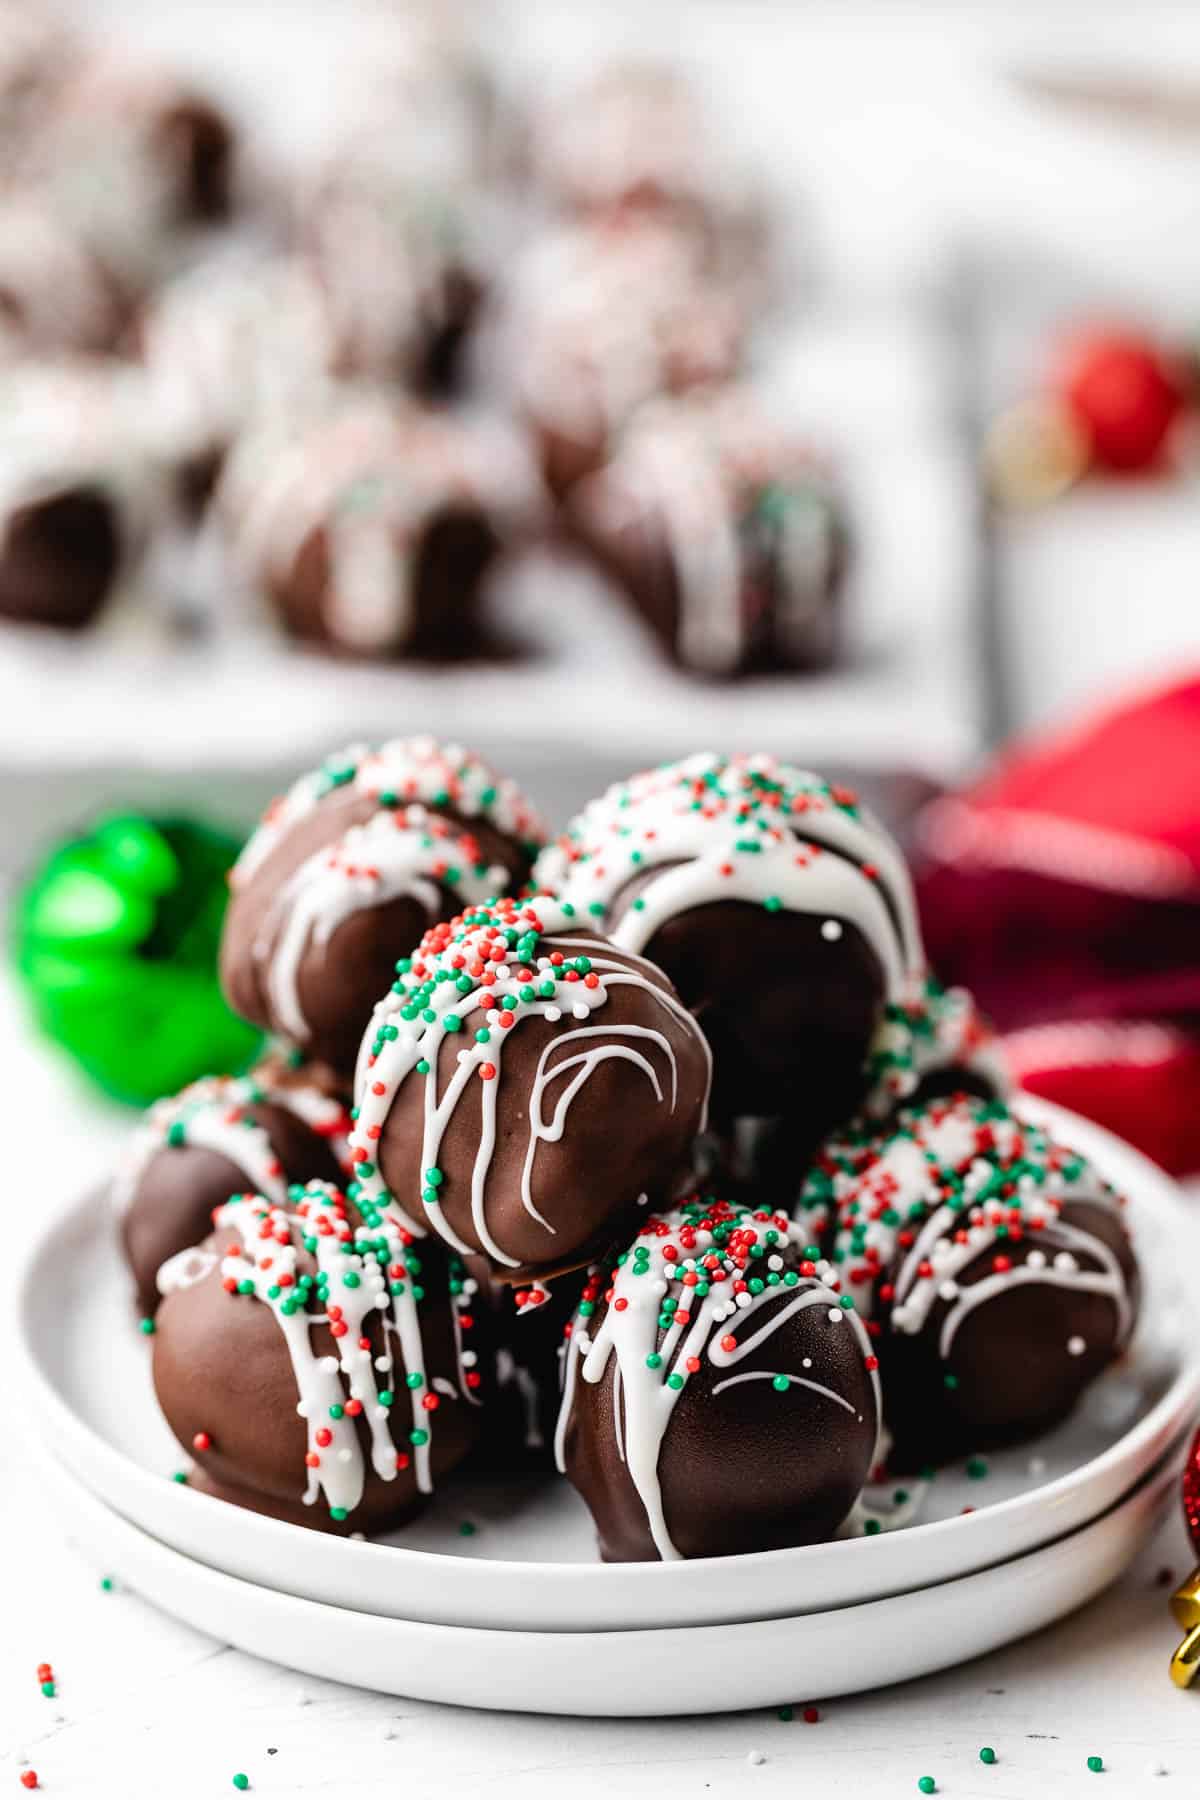 White chocolate and Christmas sprinkles on top of chocolate truffles.